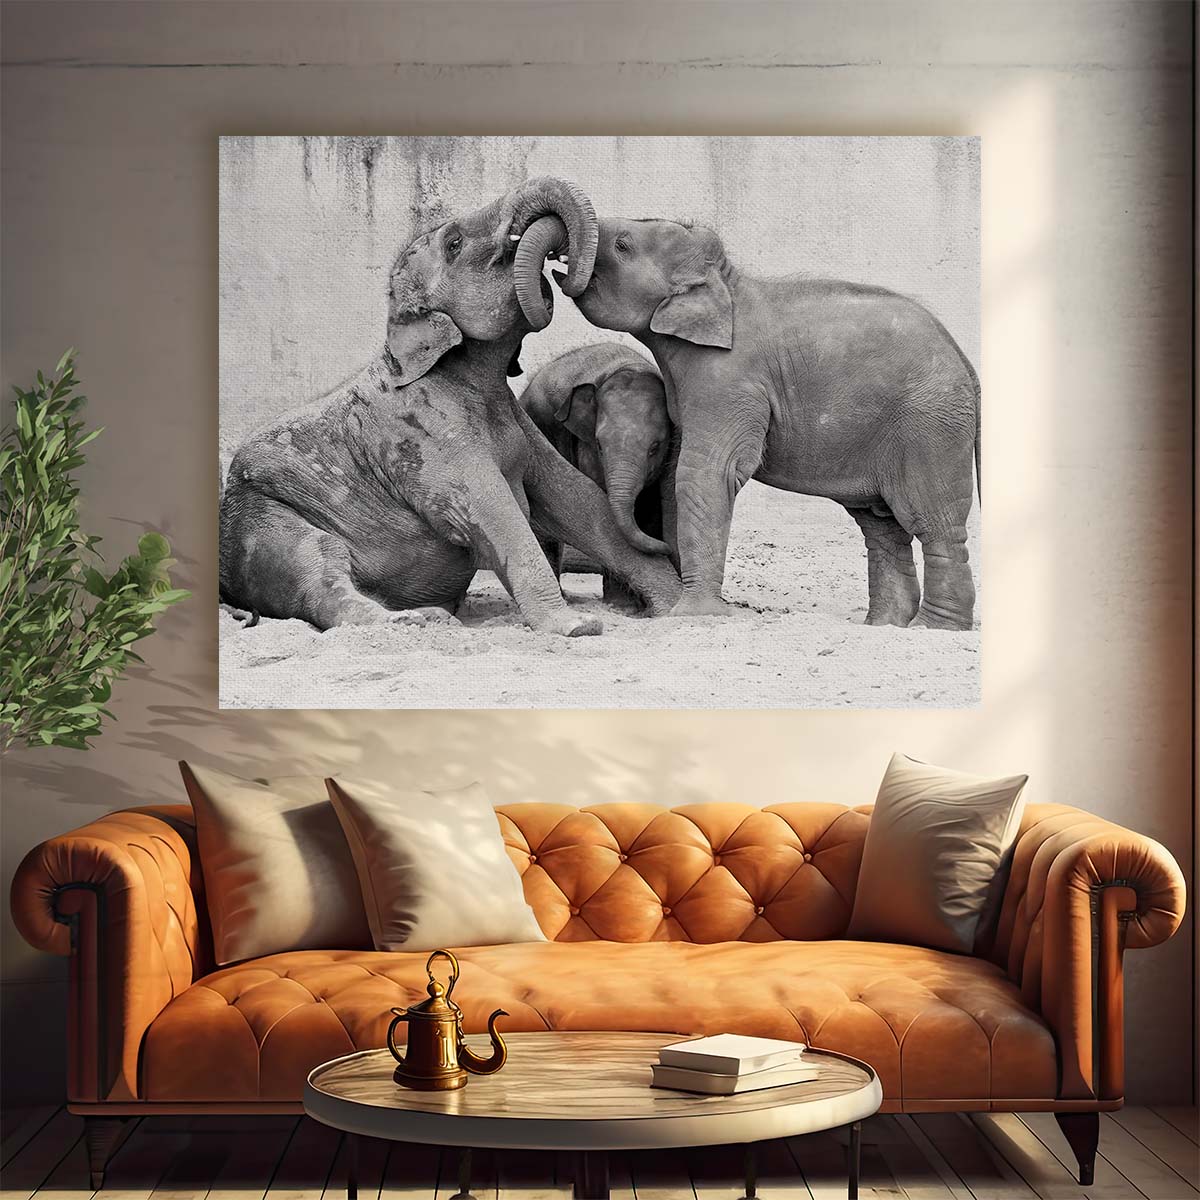 Monochrome Elephant Family Embrace & Play Wall Art by Luxuriance Designs. Made in USA.